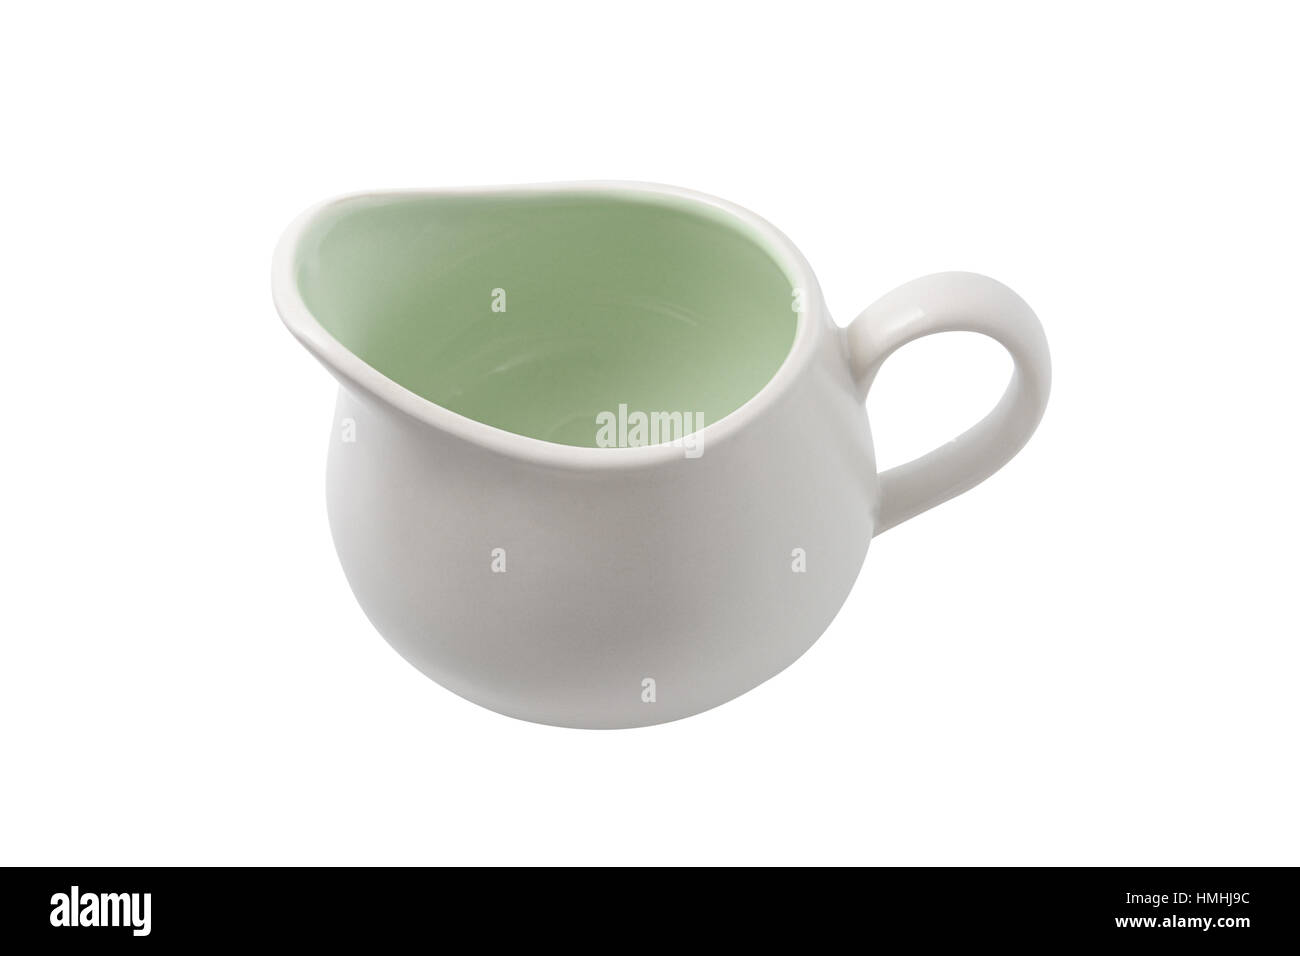 https://c8.alamy.com/comp/HMHJ9C/white-ceramic-pitcher-isolated-on-white-with-clipping-path-HMHJ9C.jpg